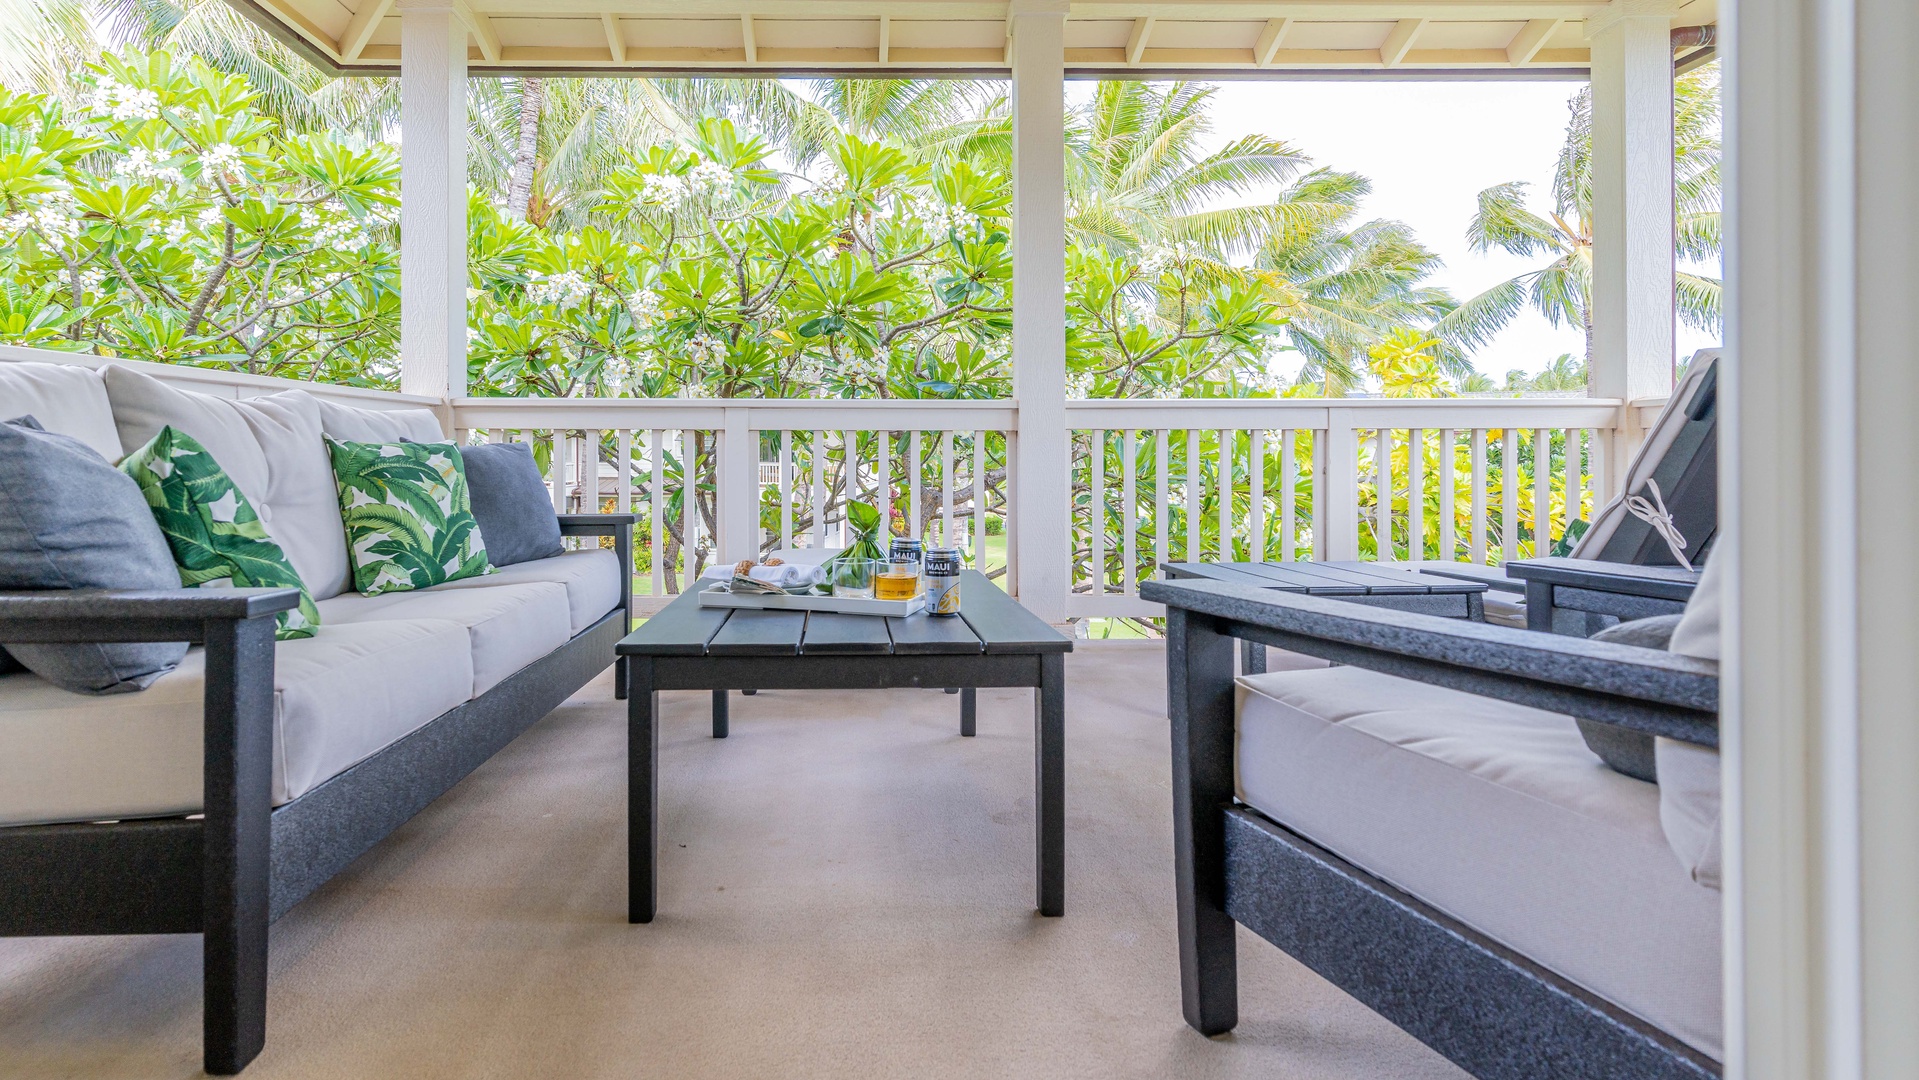 Kapolei Vacation Rentals, Coconut Plantation 1136-4 - The upstairs lanai nestled in the trees.